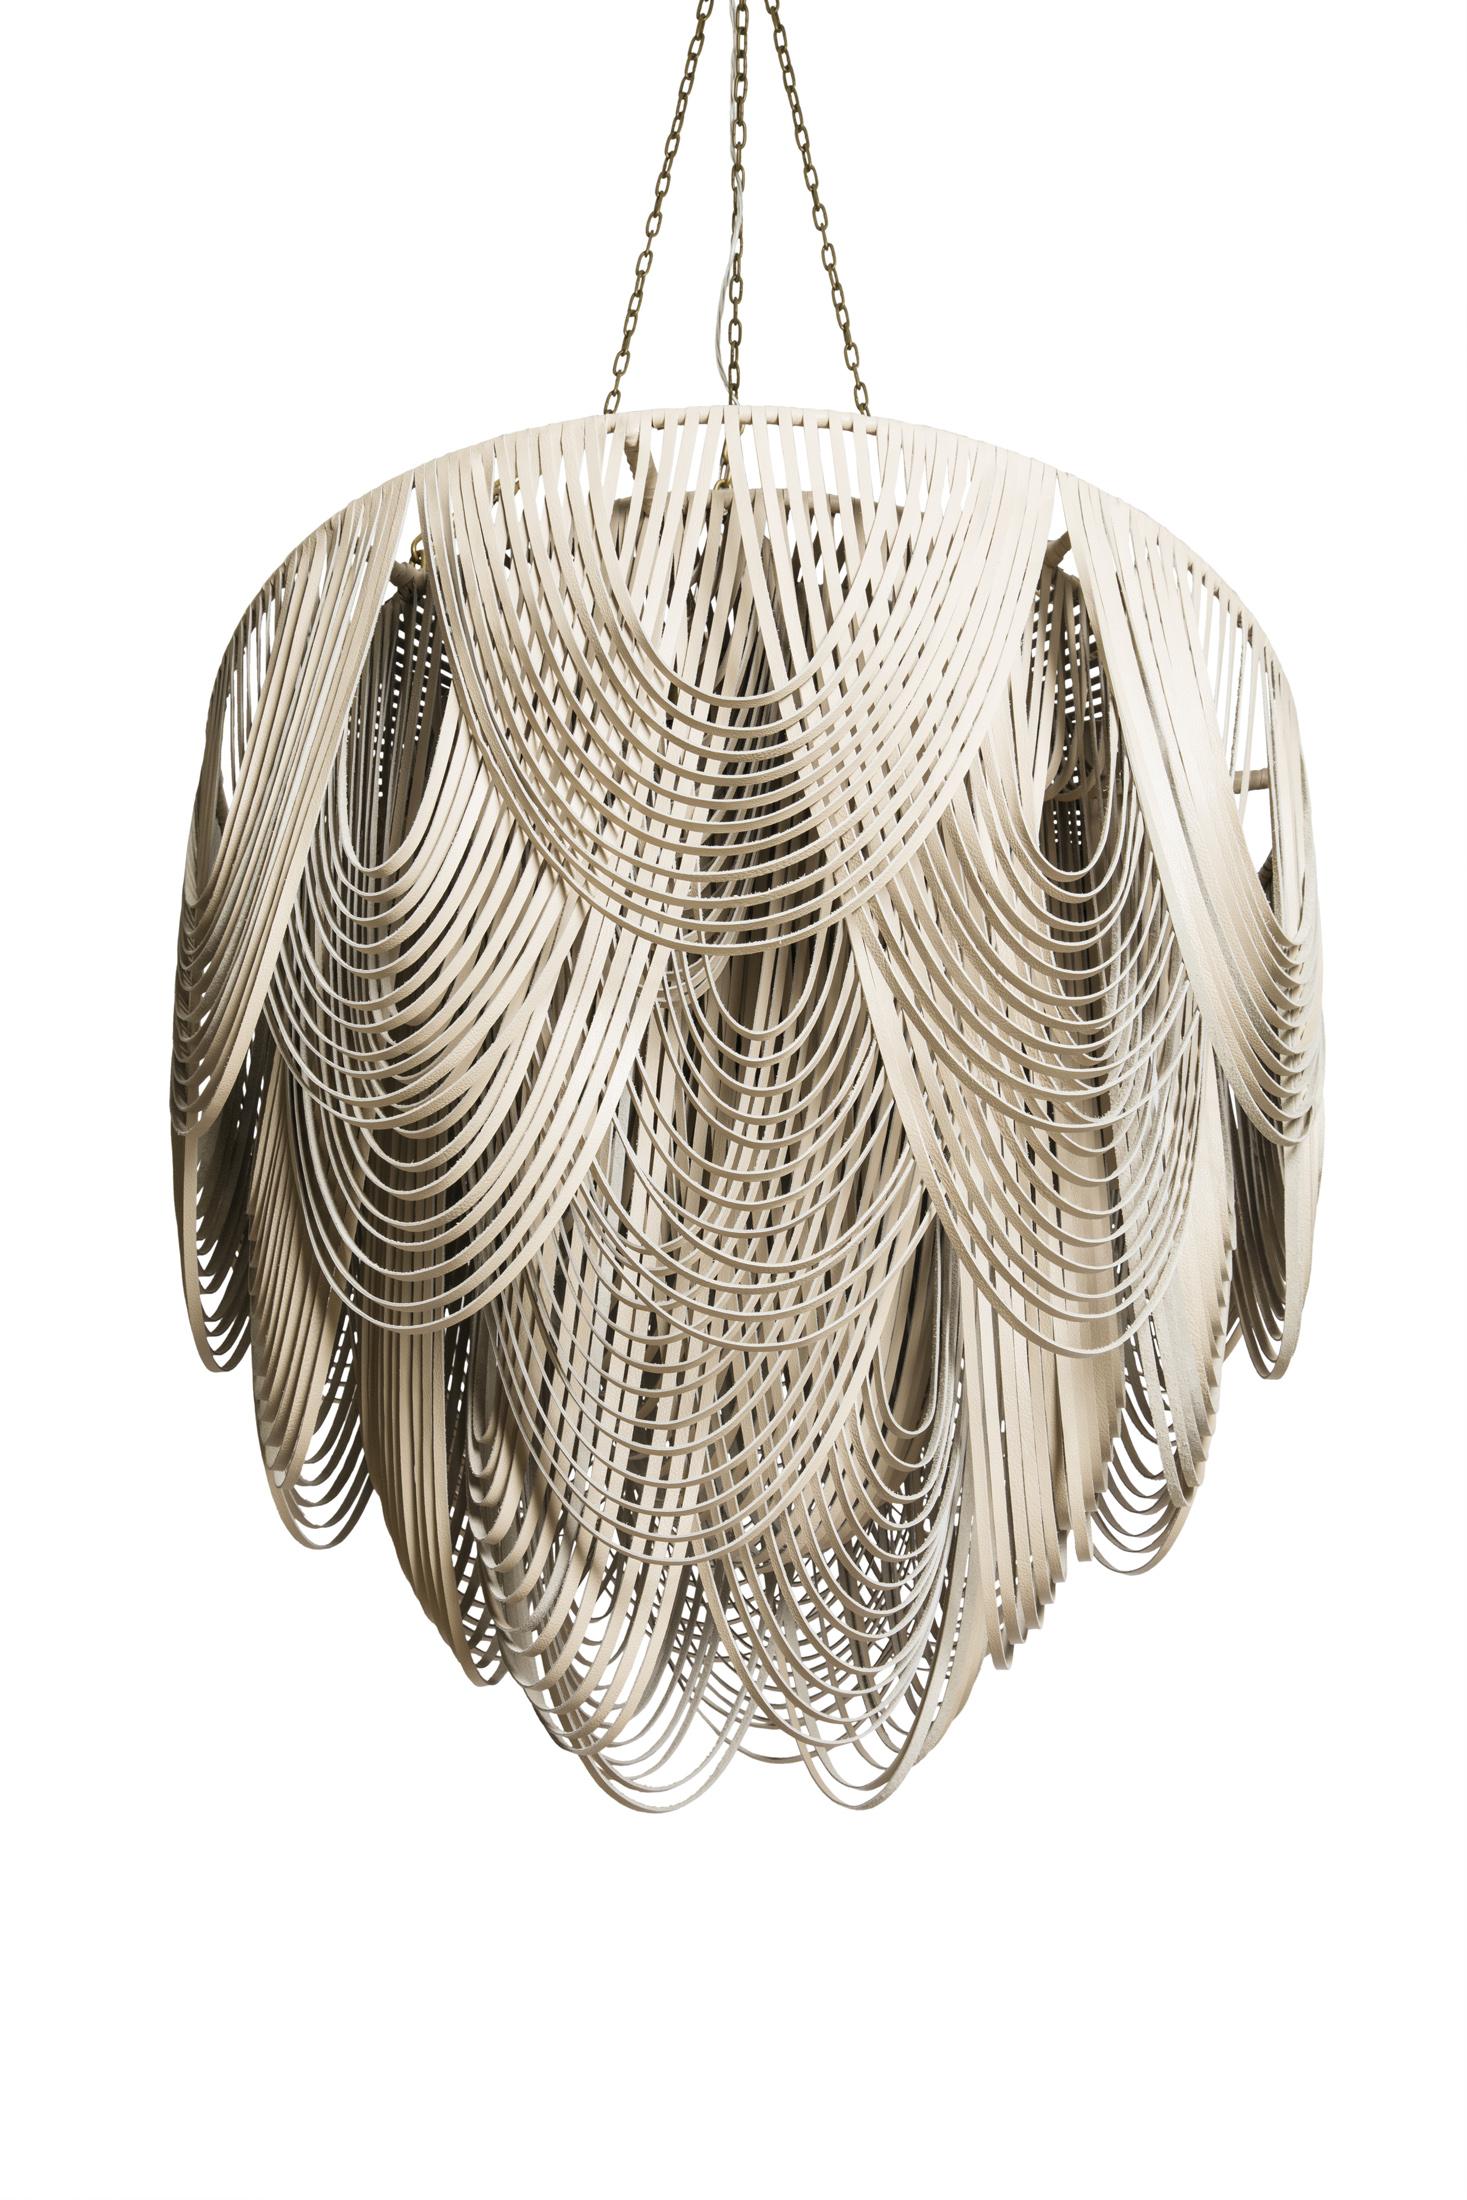 Large Round Whisper Leather Chandelier in Cream-Stone Leather